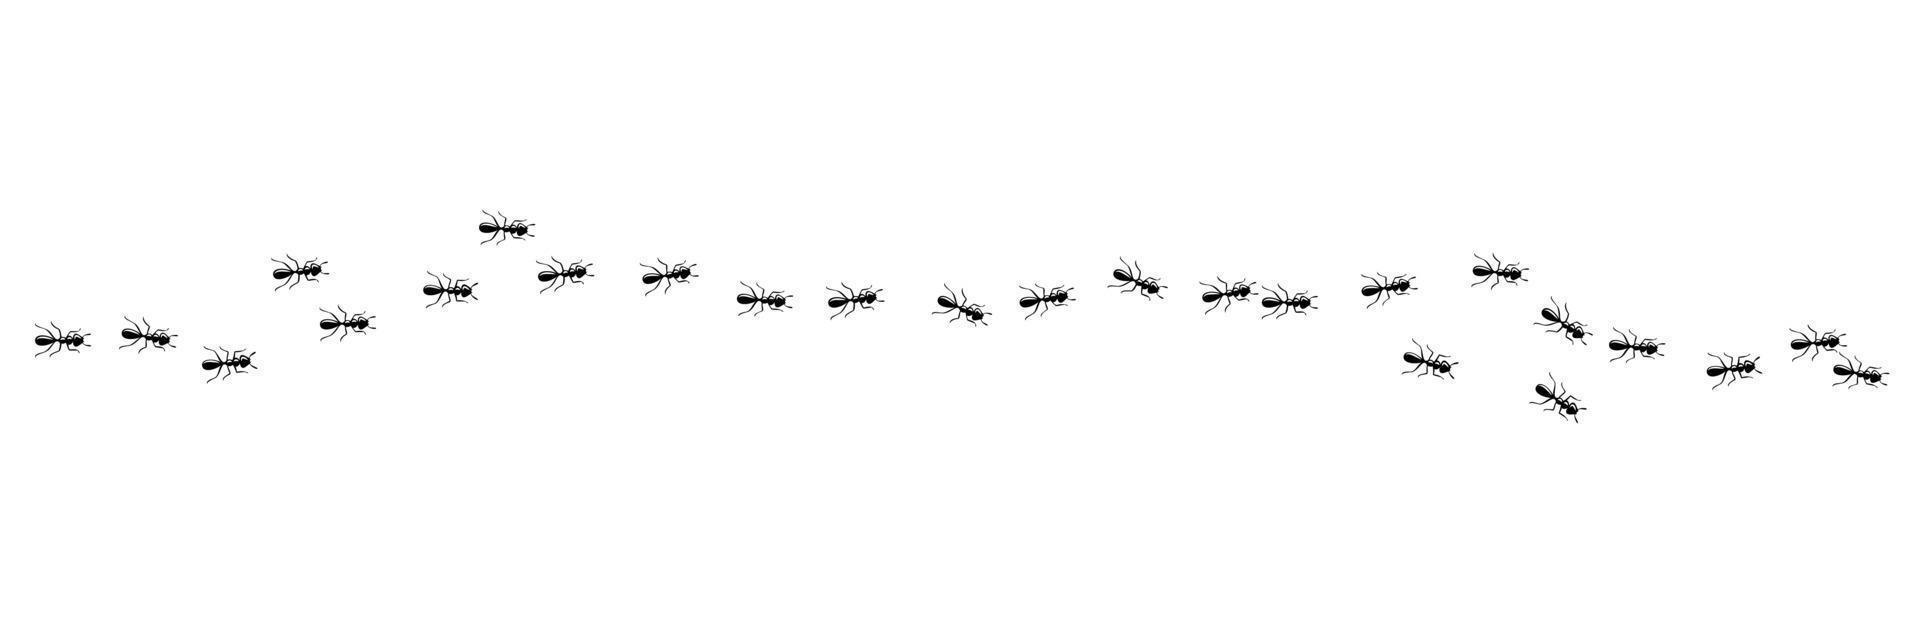 Ants colony marching in trail. Ant path isolated in white background. Vector illustration